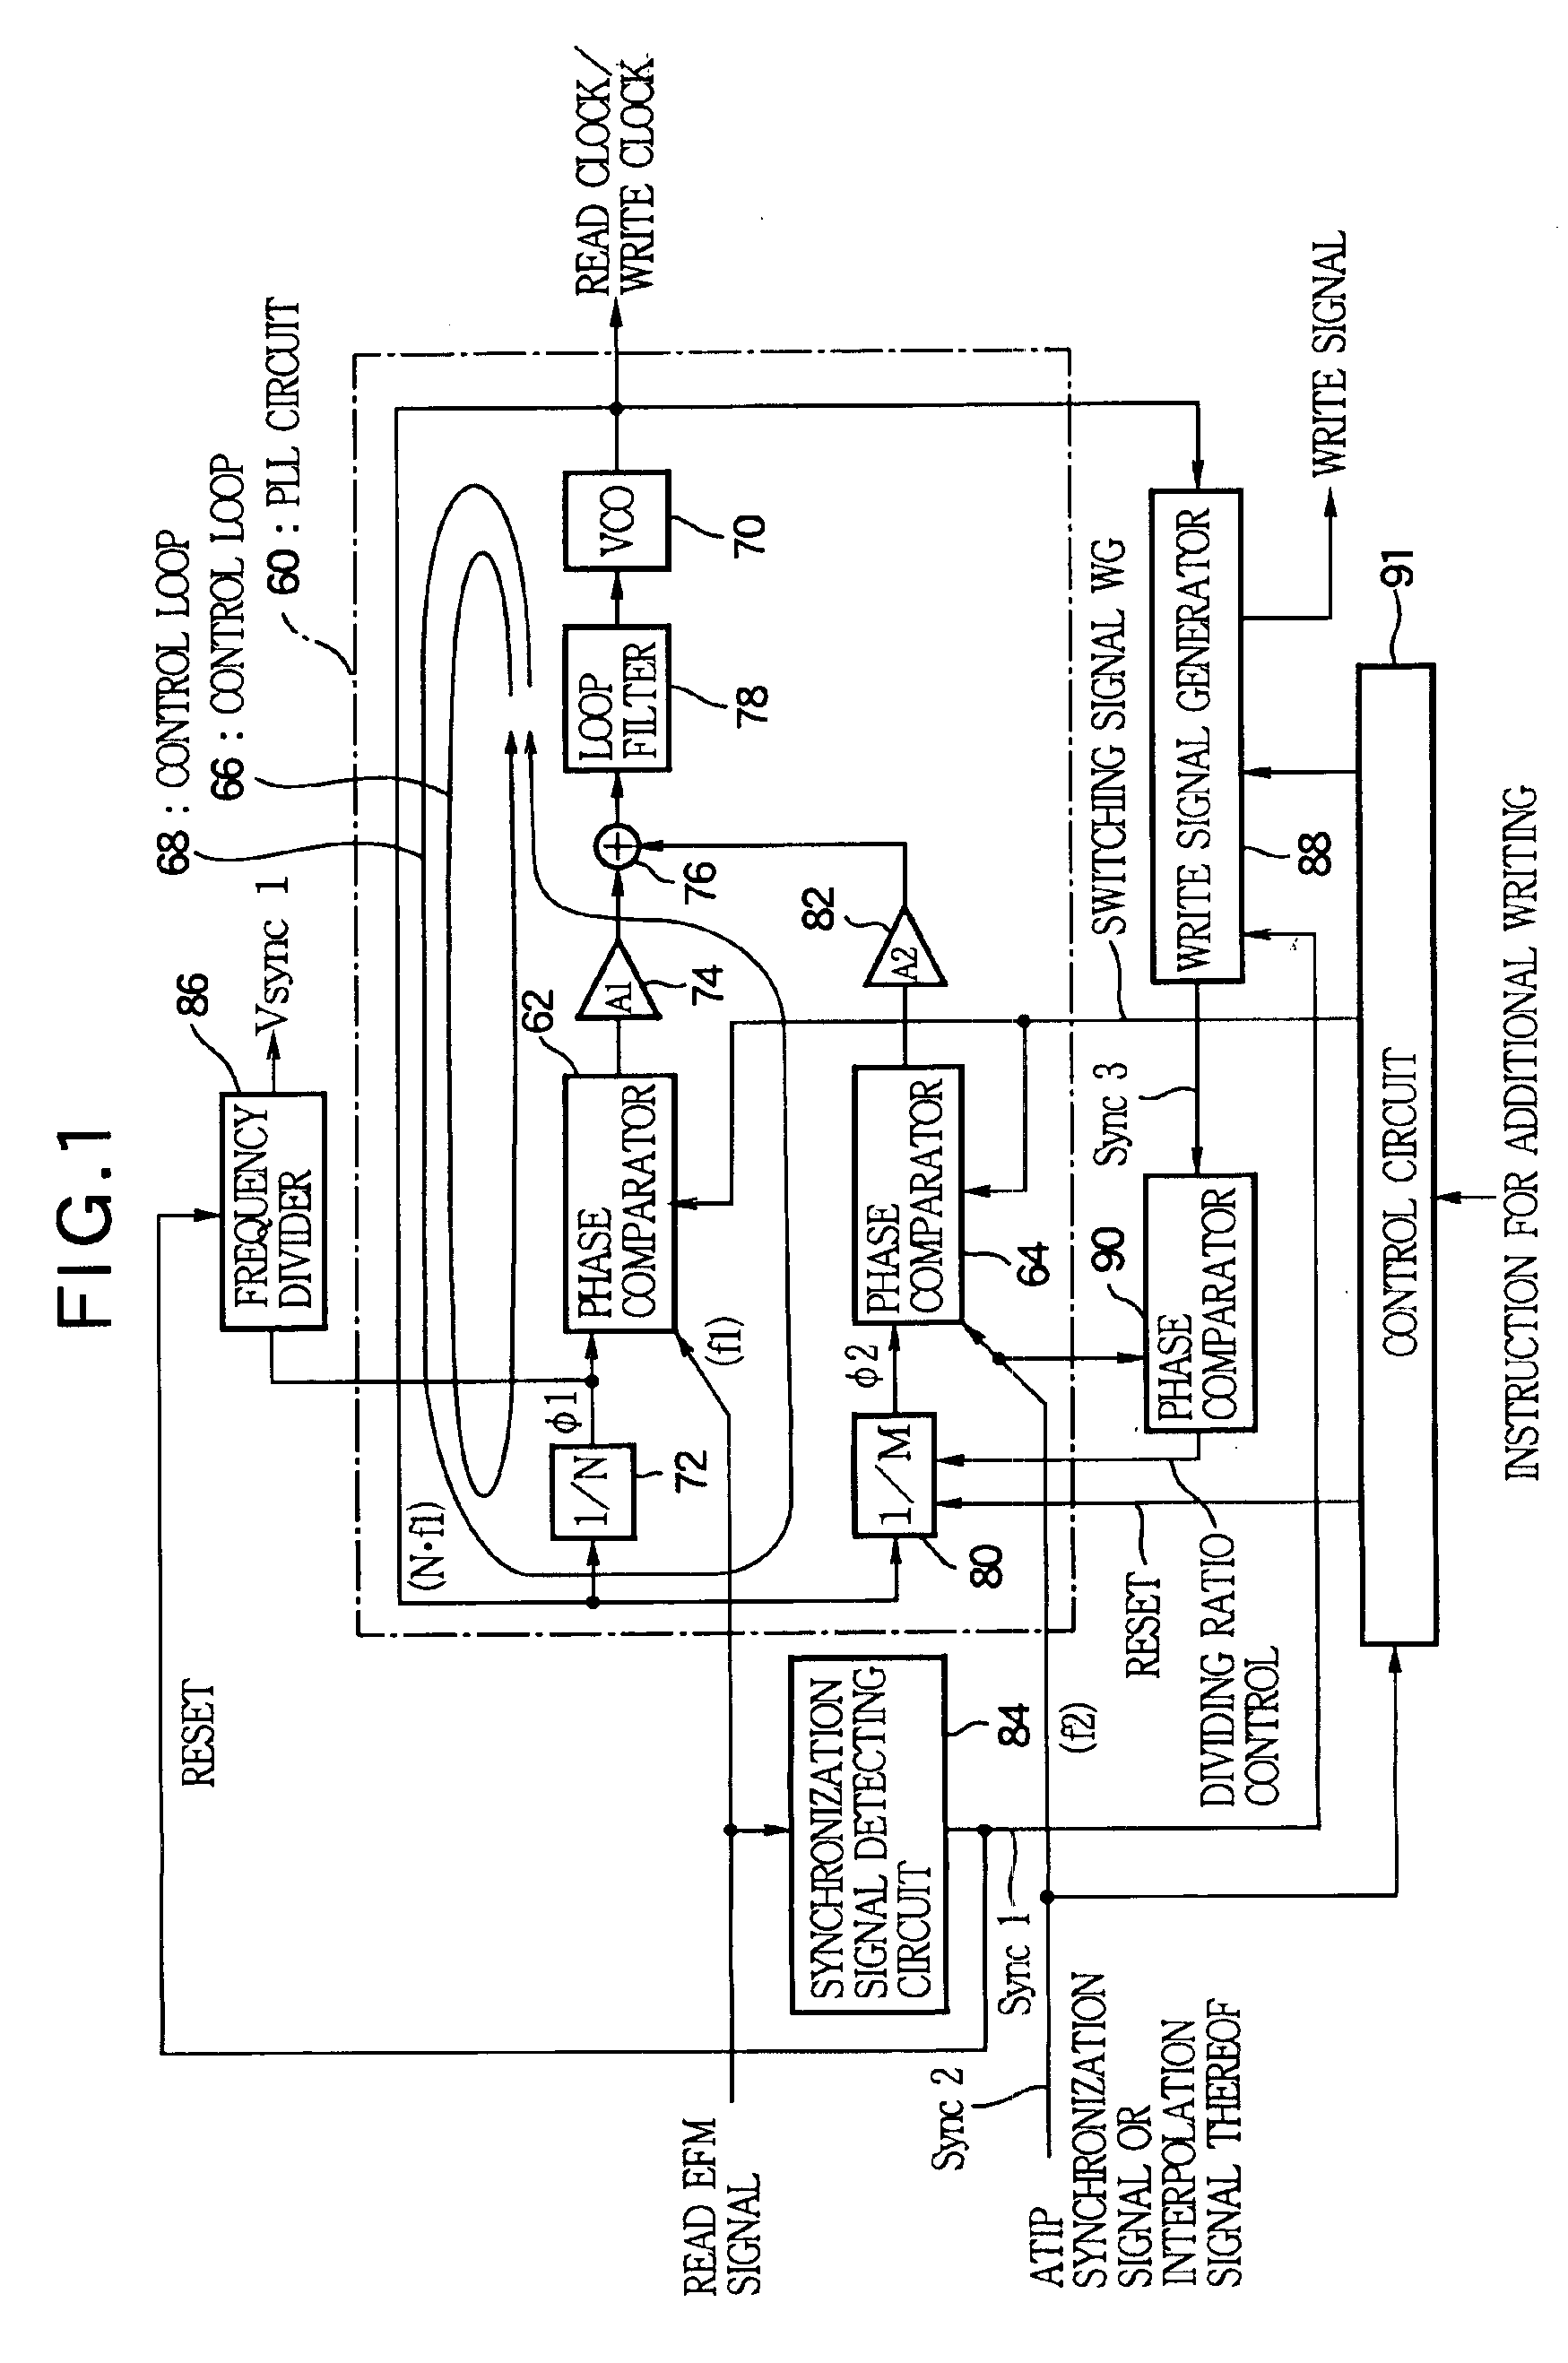 Method of consecutive writing on recordable disc